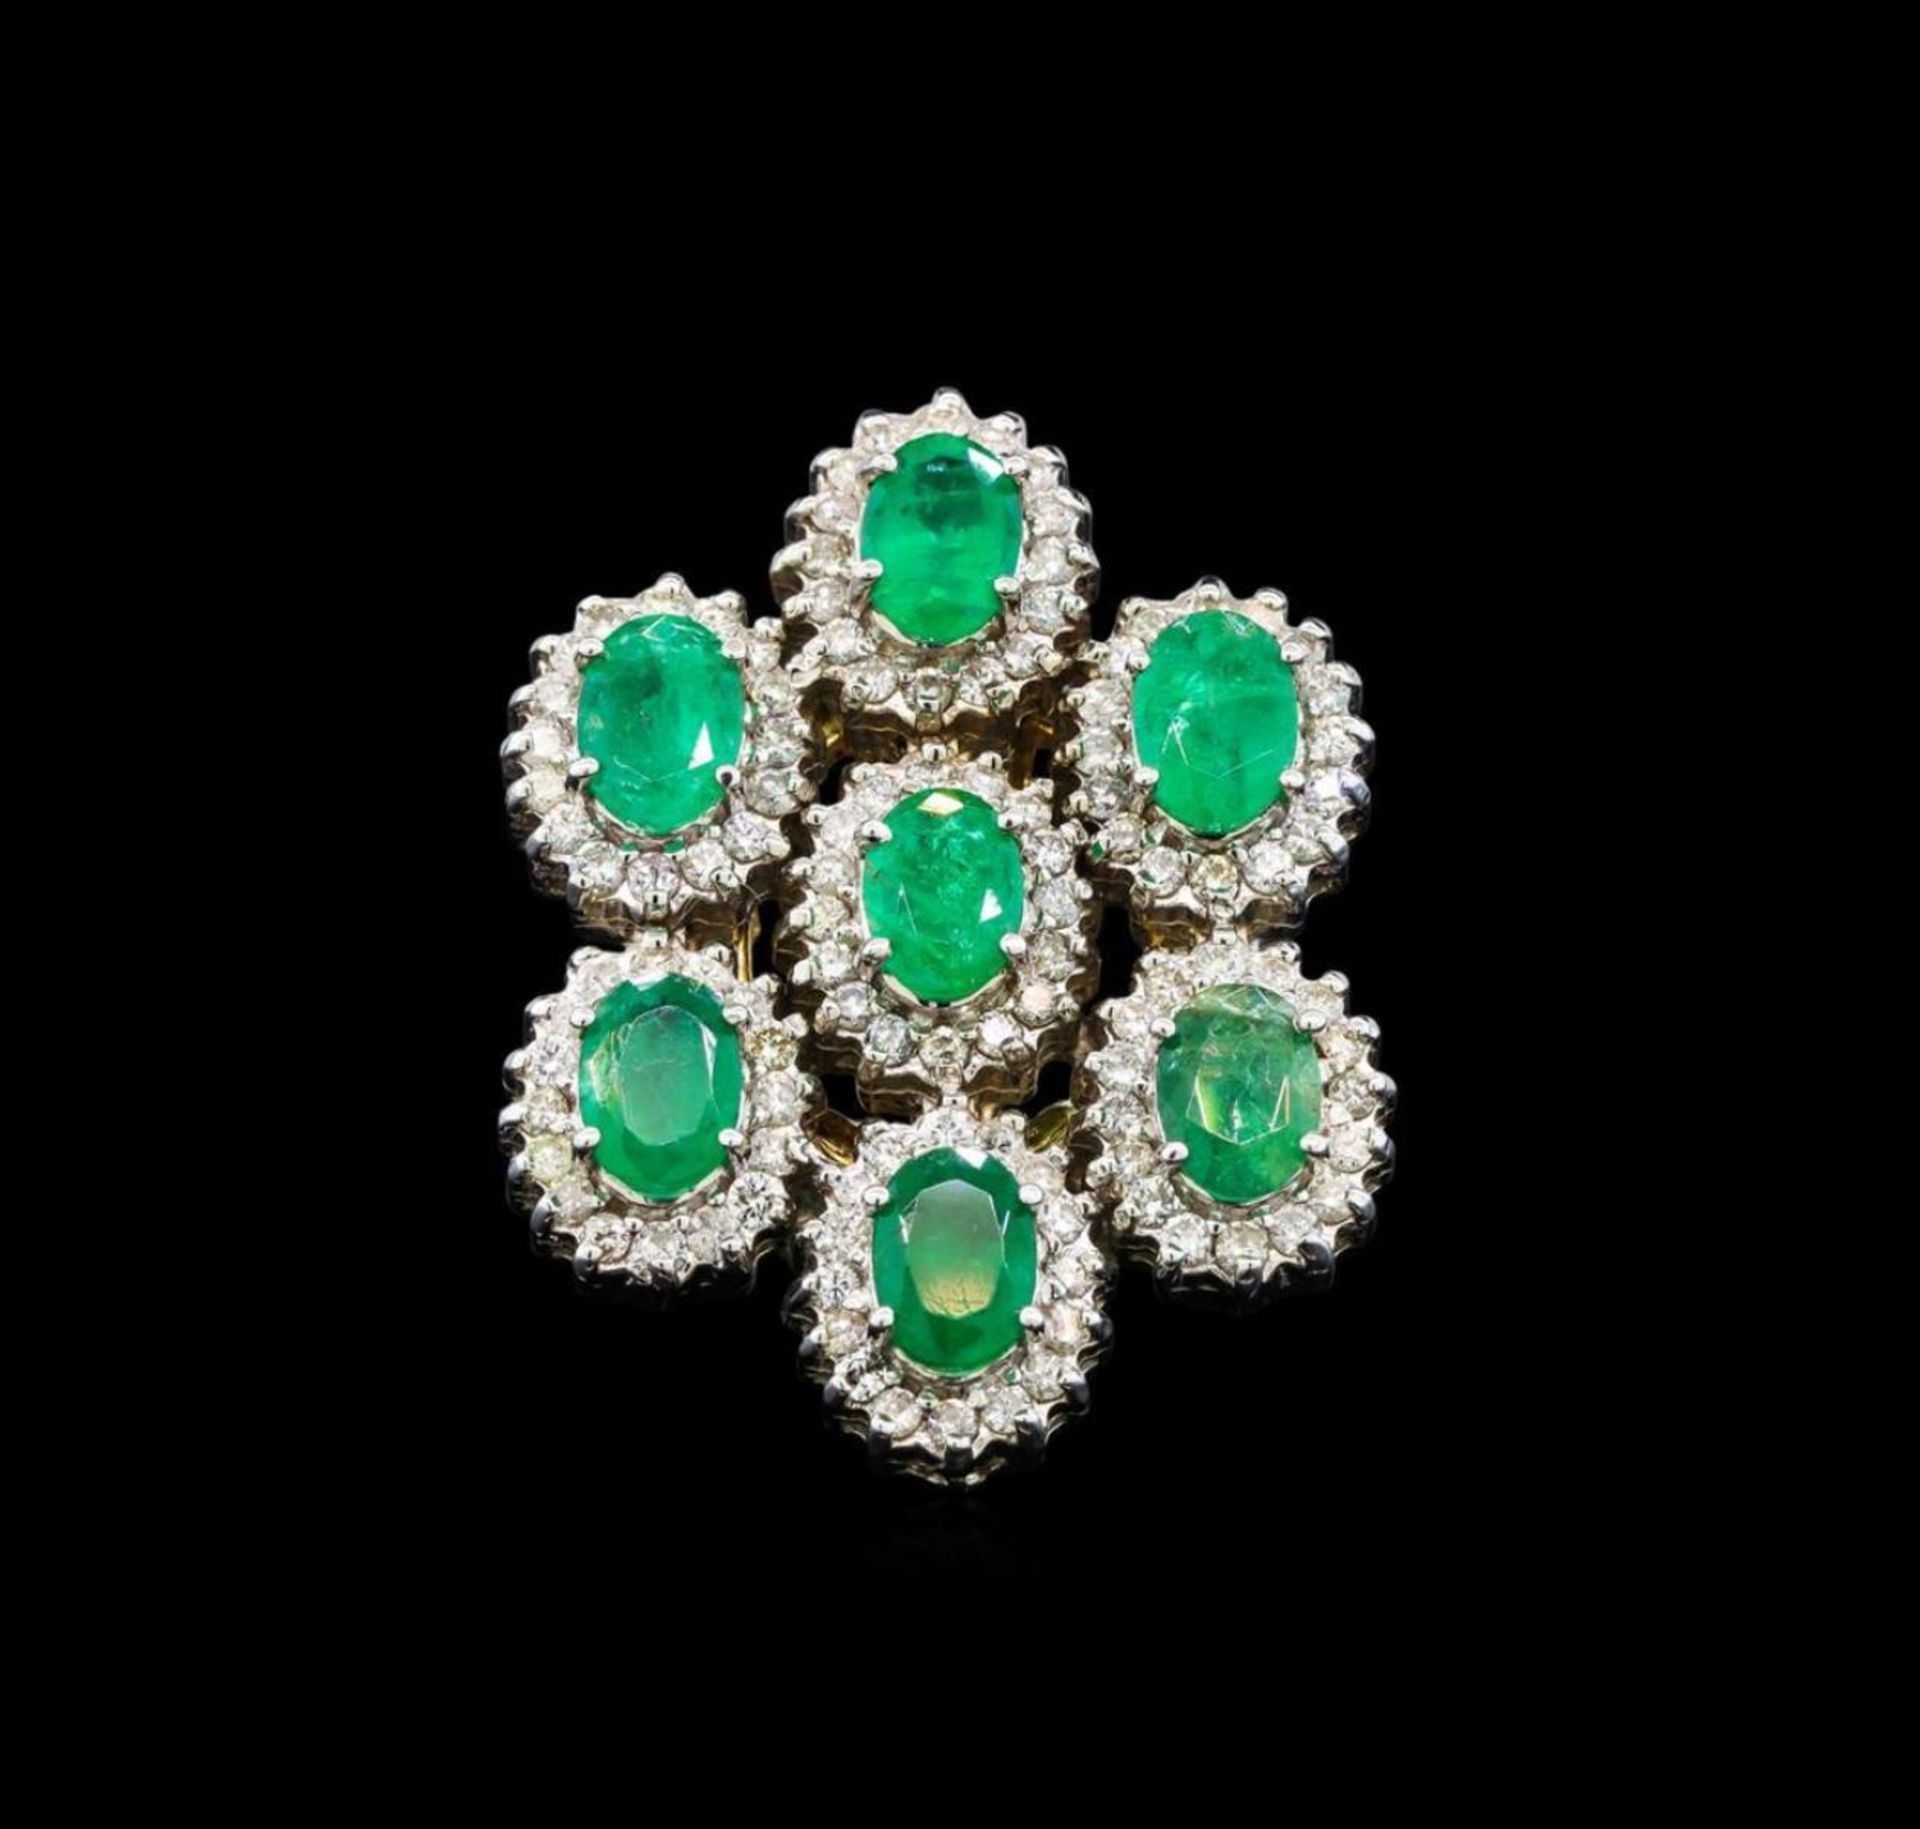 14KT Yellow Gold 4.90 ctw Emerald and Diamond Ring - Image 2 of 5